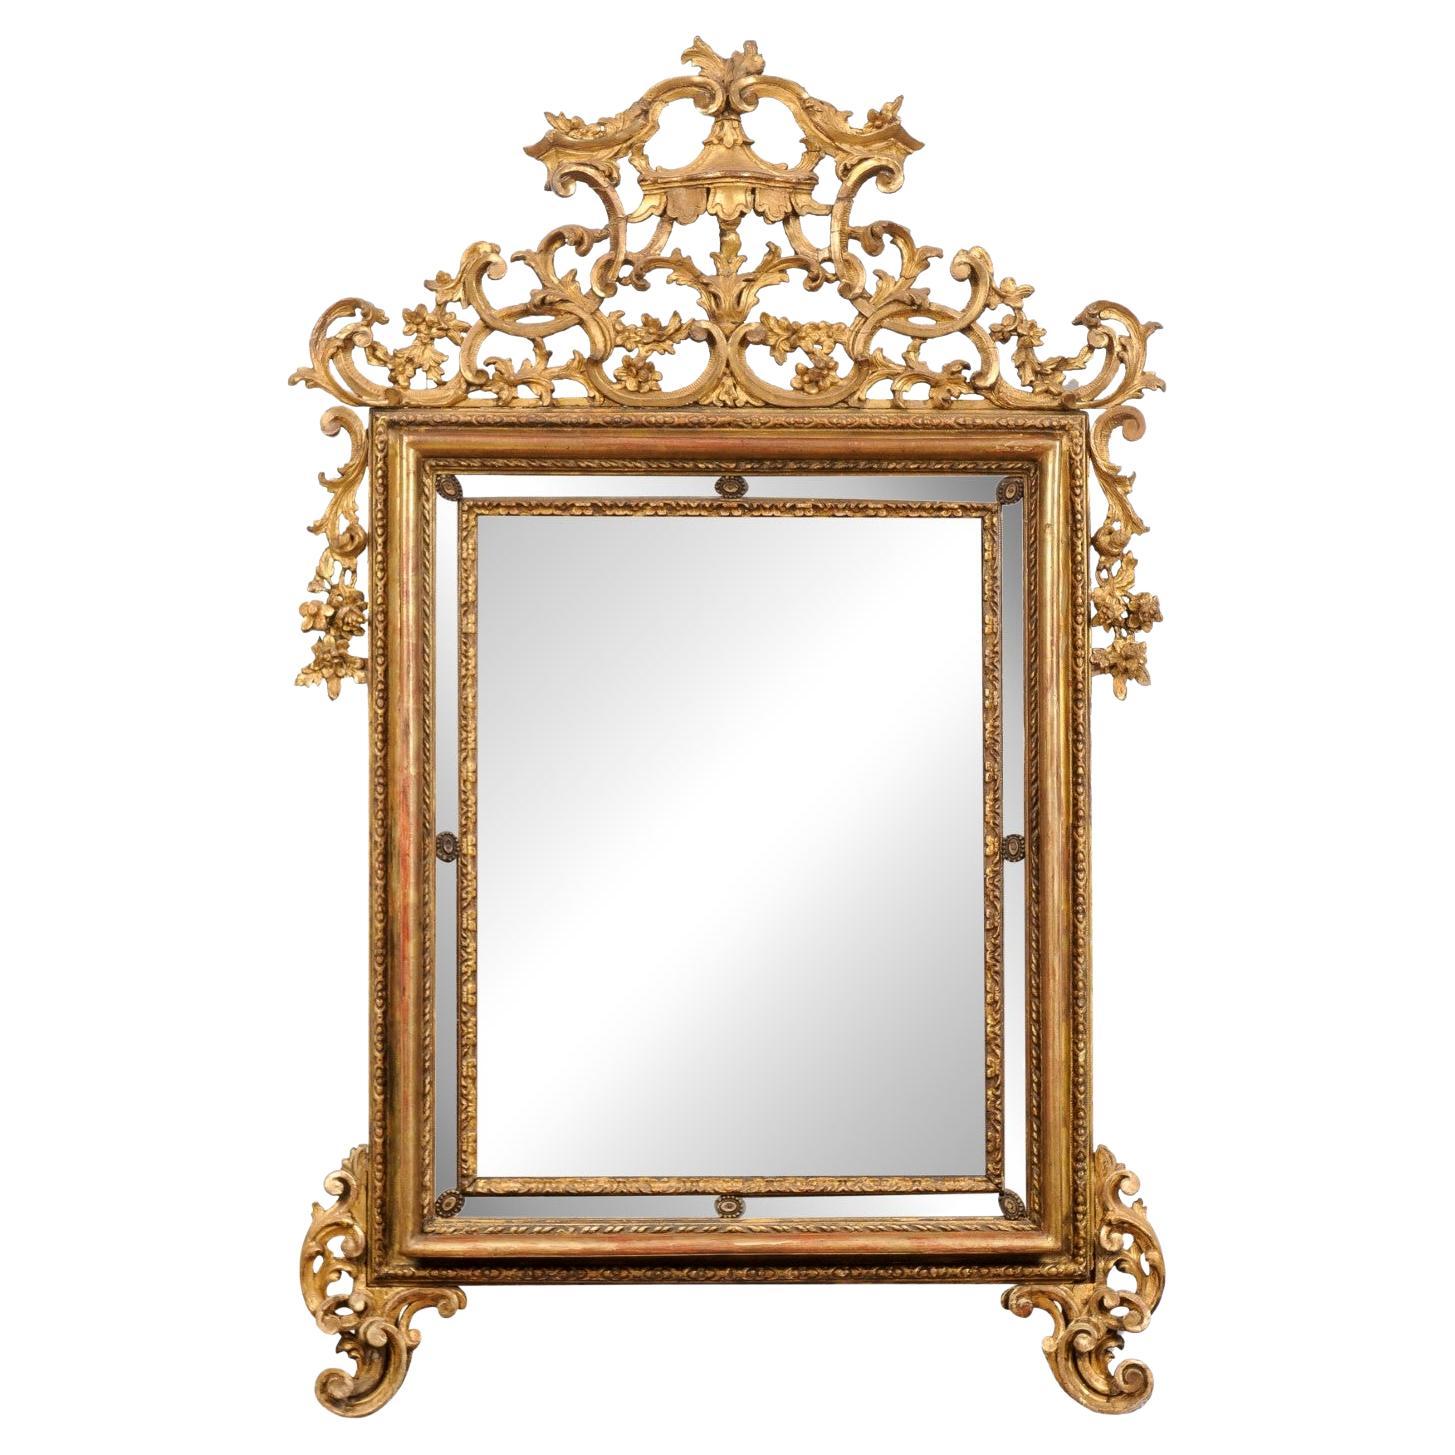 Large 18th Century Italian Rococo Giltwood Mirror with Pagoda Top For Sale